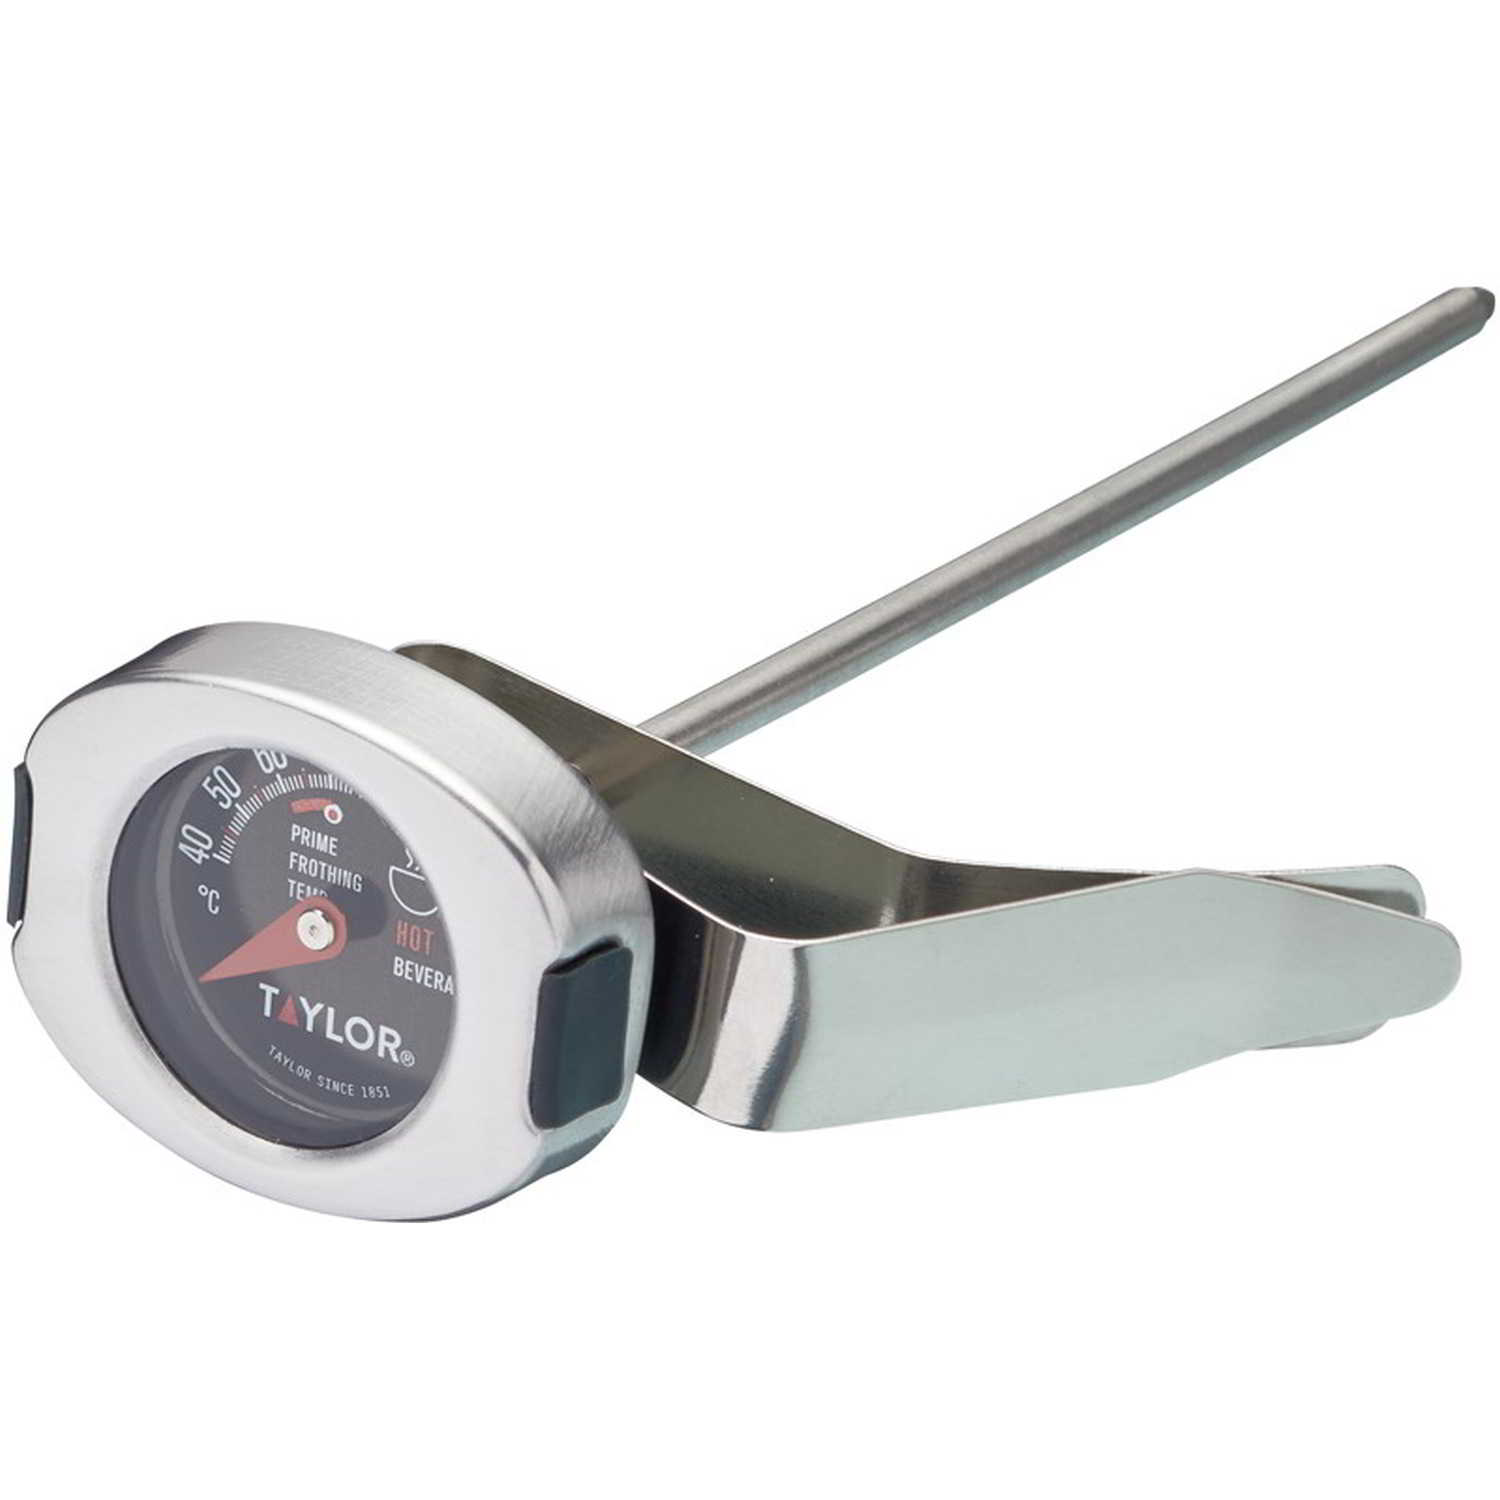 Taylor Pro Stainless Steel Leave-In Oven Thermometer TYPTHOVENSS